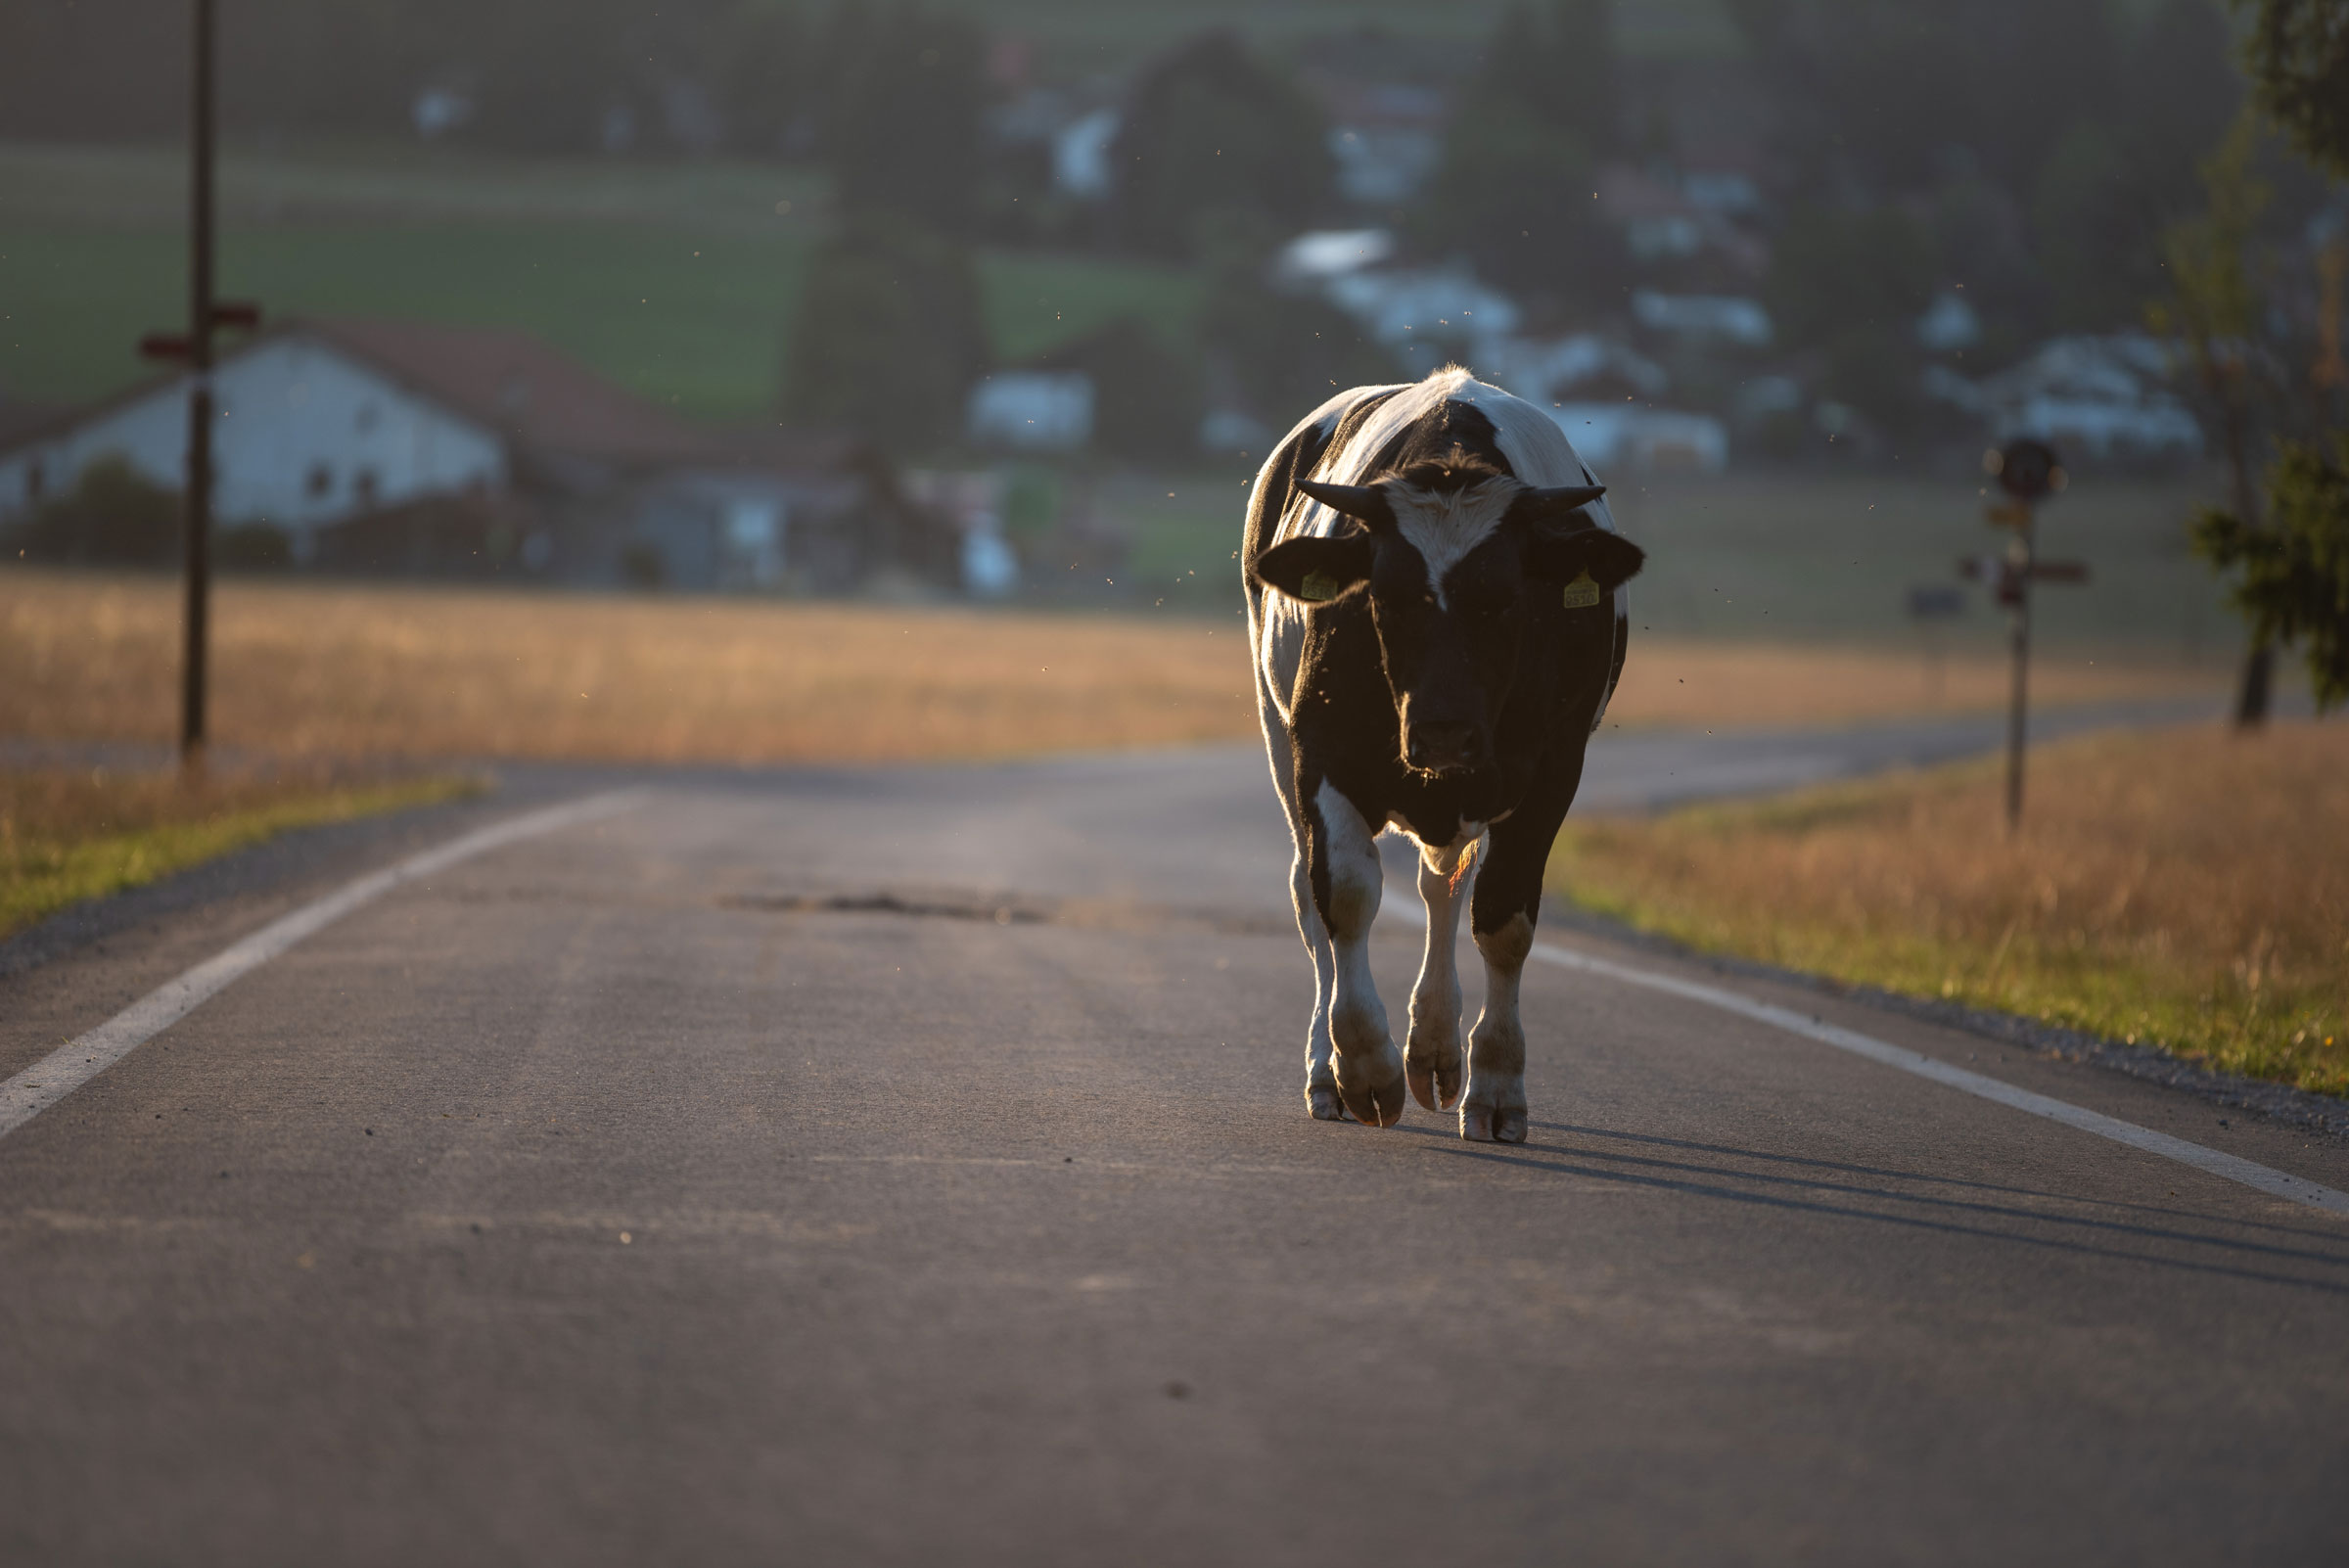 Who’s liable when livestock straying onto a road cause an accident?